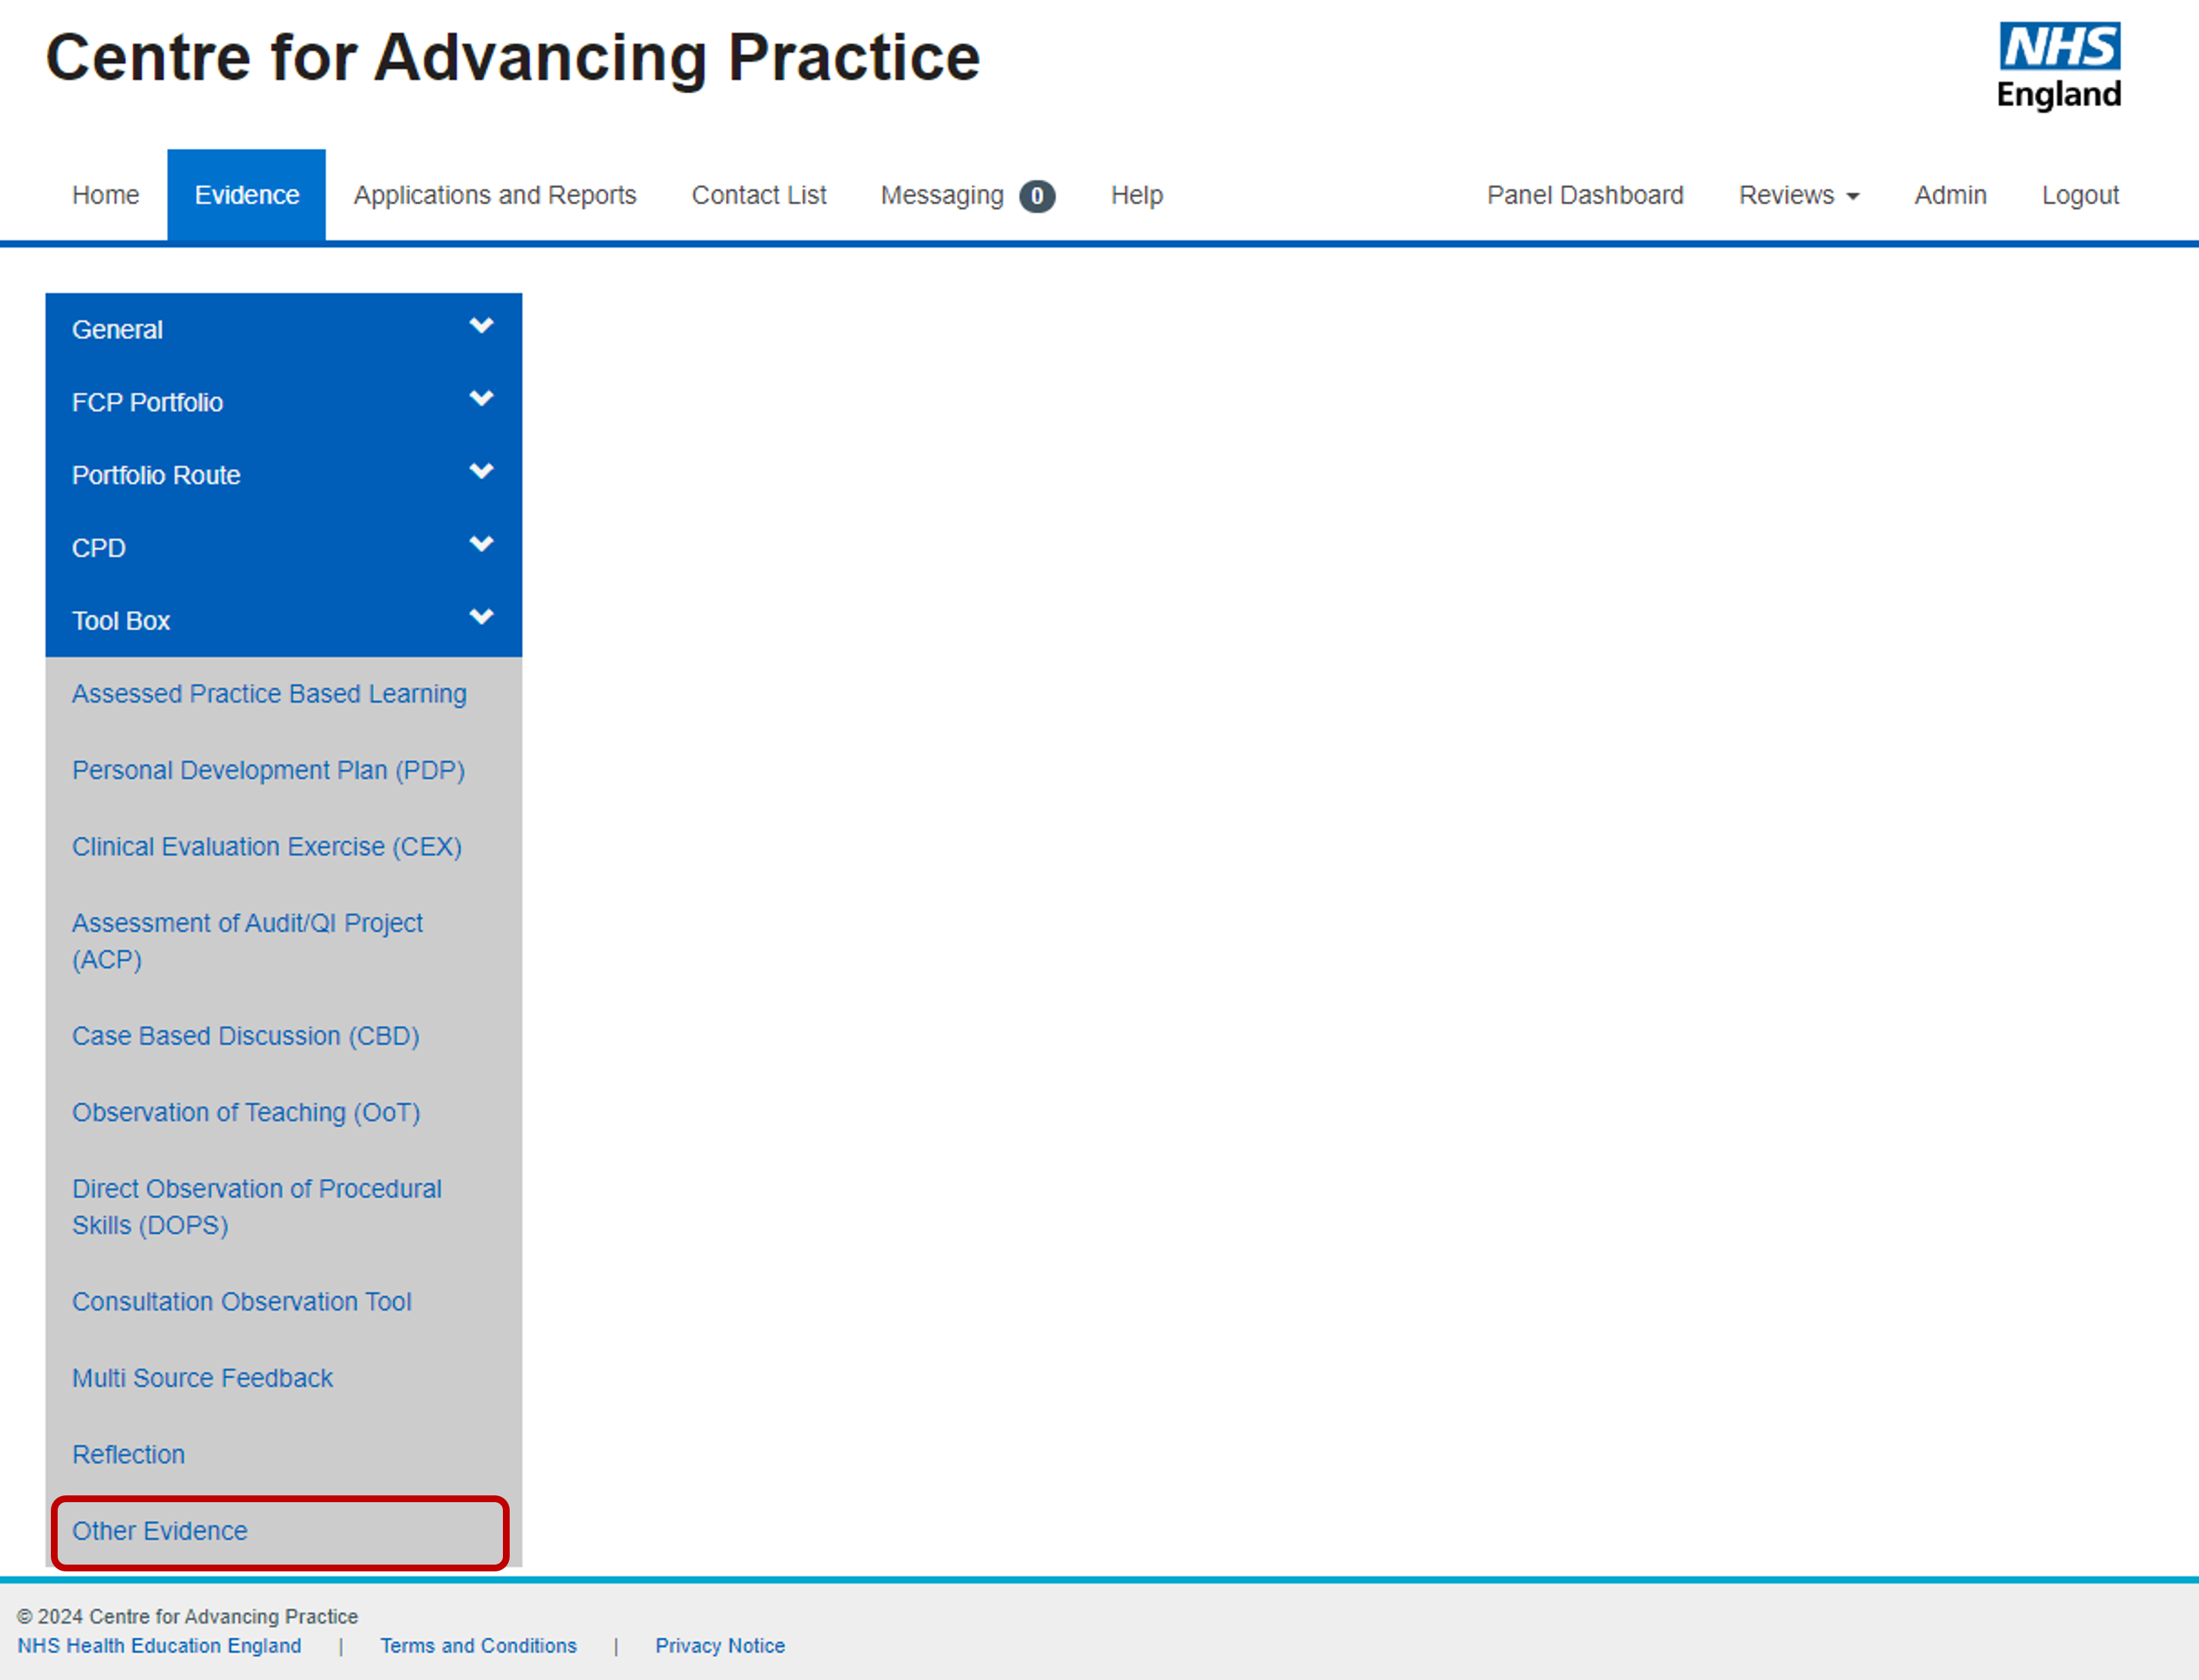 Centre for Advancing Practice Portal - Evidence section showing toolbox